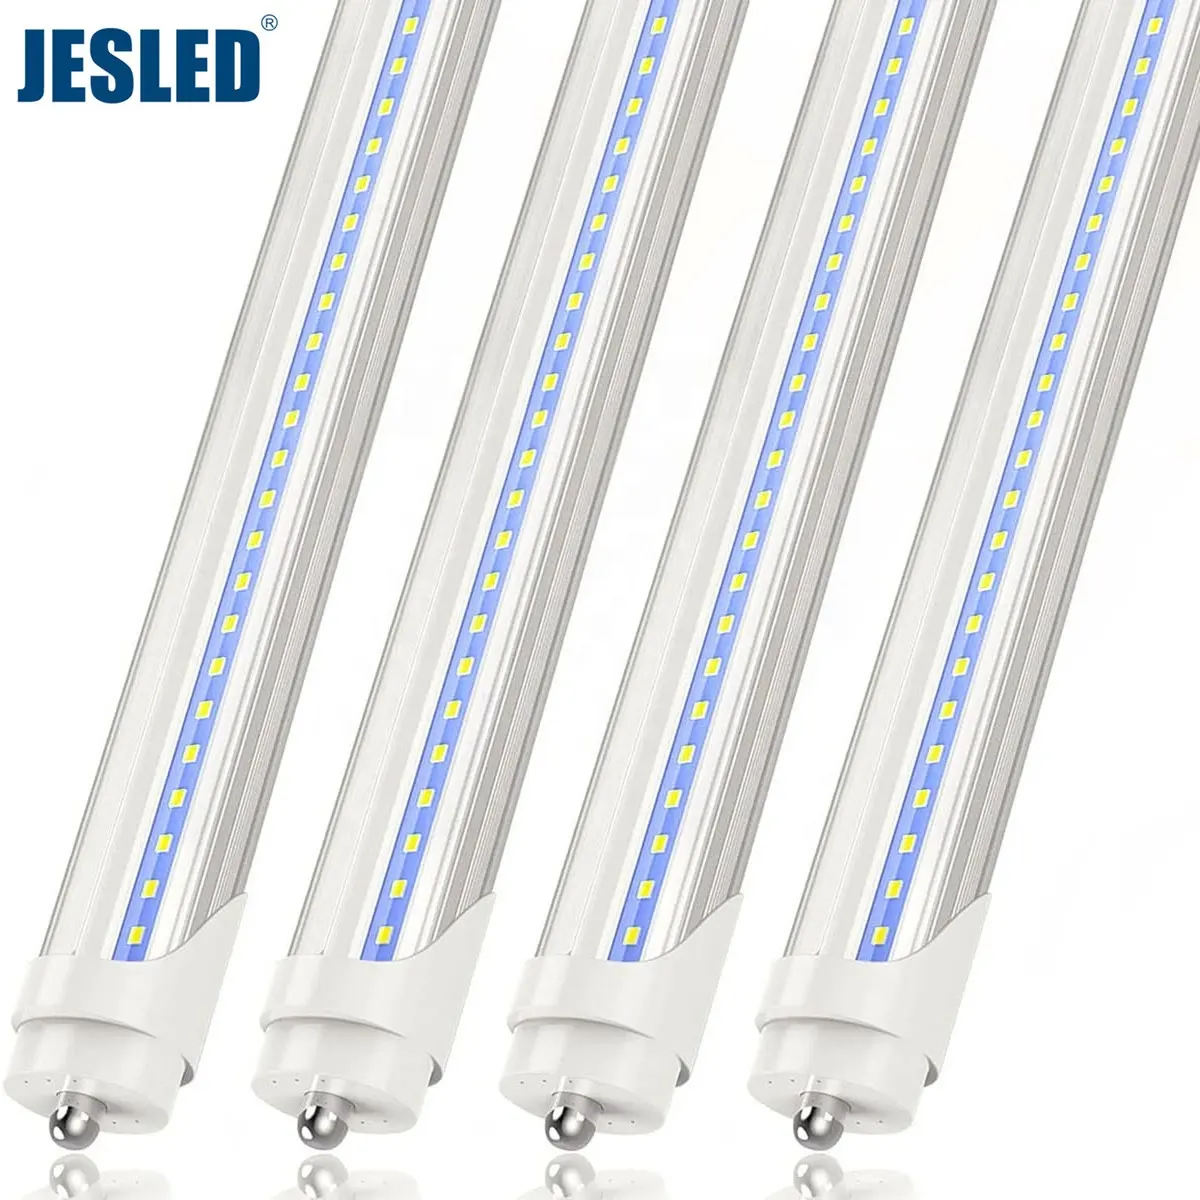 JESLED T8 T10 T12 Luces de tubo LED Dual-End Powered Remove Ballast Type B Bombillas 8FT FA8 45W Super Bright Clear Cover ETL Listed